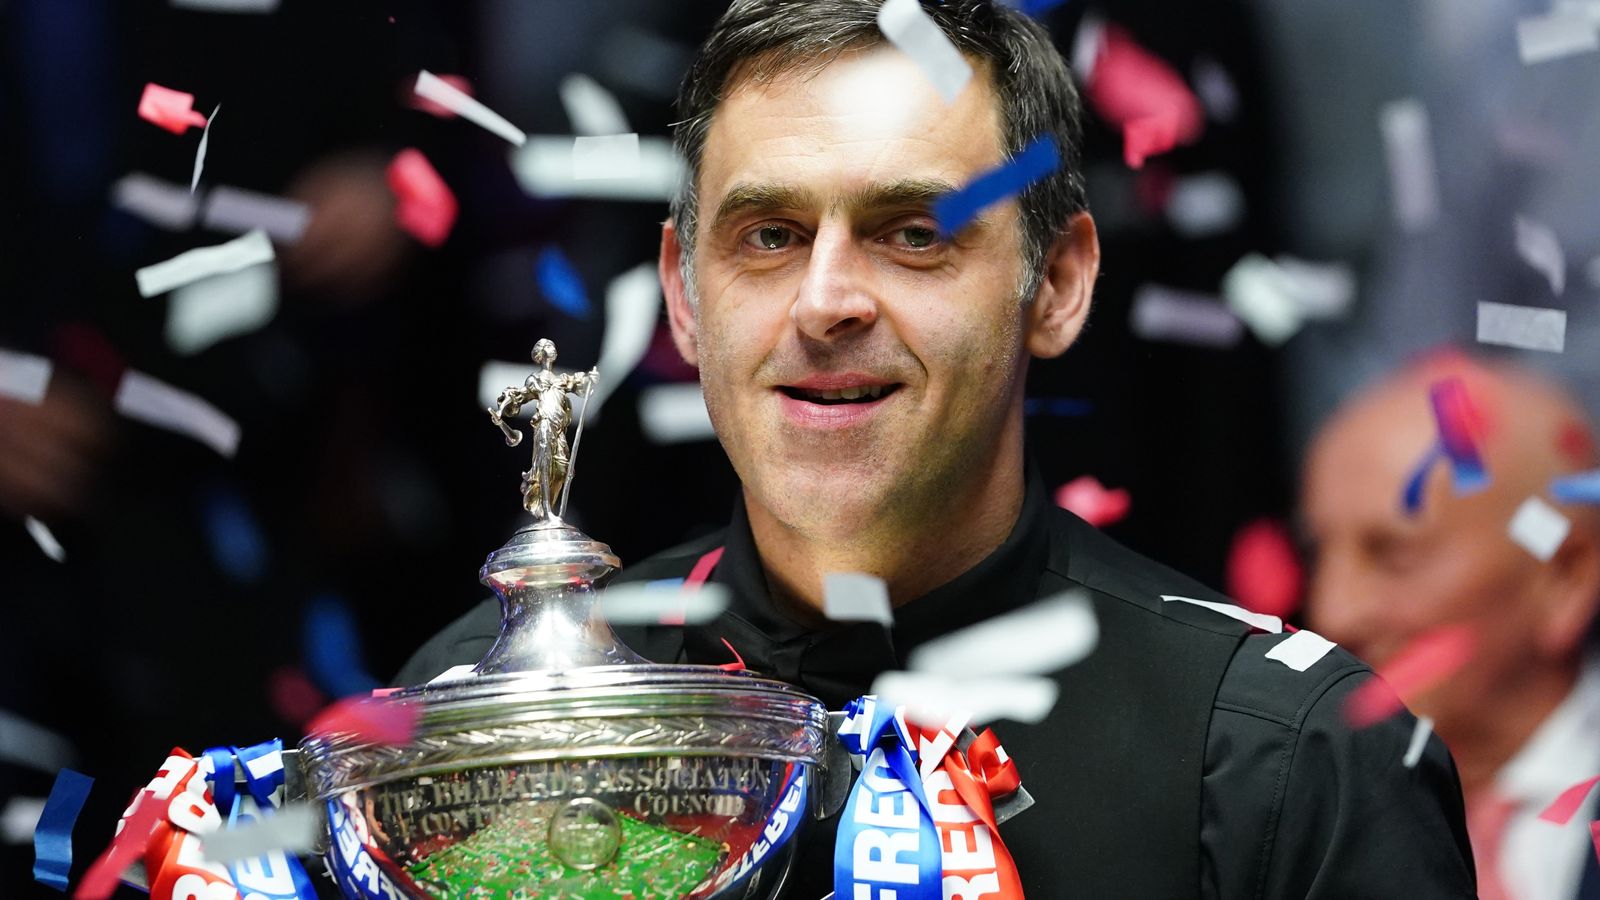 Ronnie OSullivan wins seventh World Snooker title and becomes oldest champion in history UK News Sky News